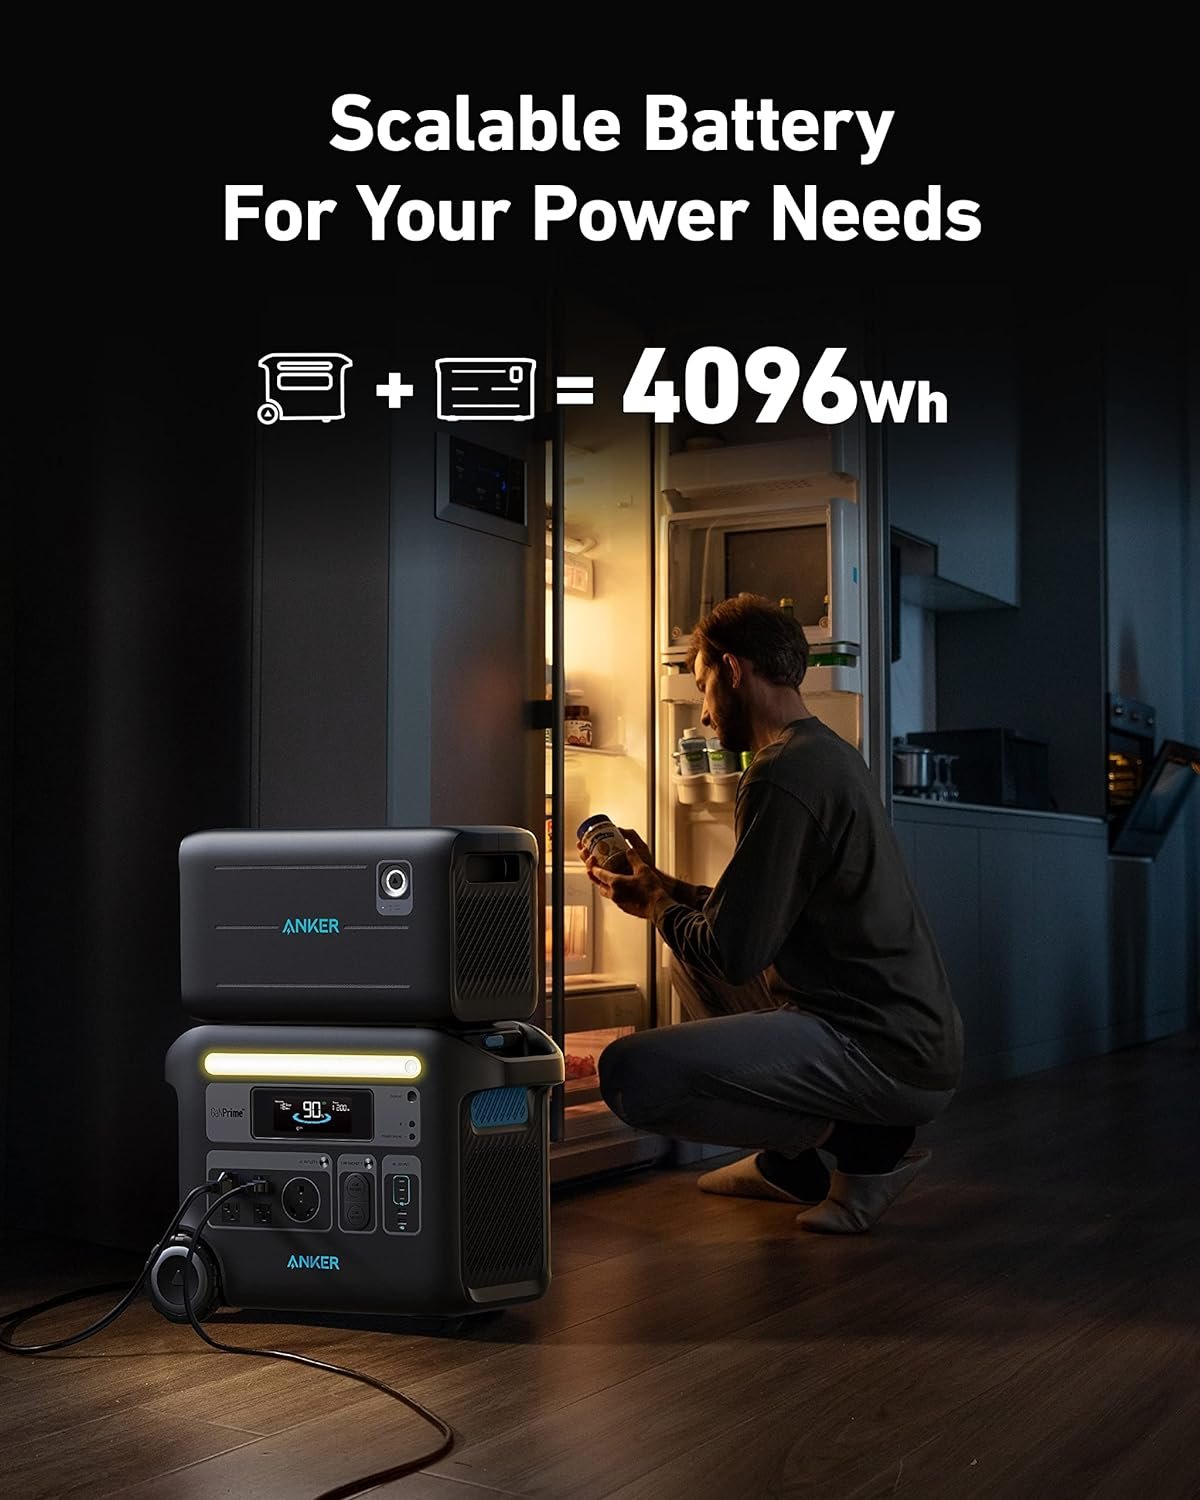 Anker 2400W Portable Solar Generator Power Station Review